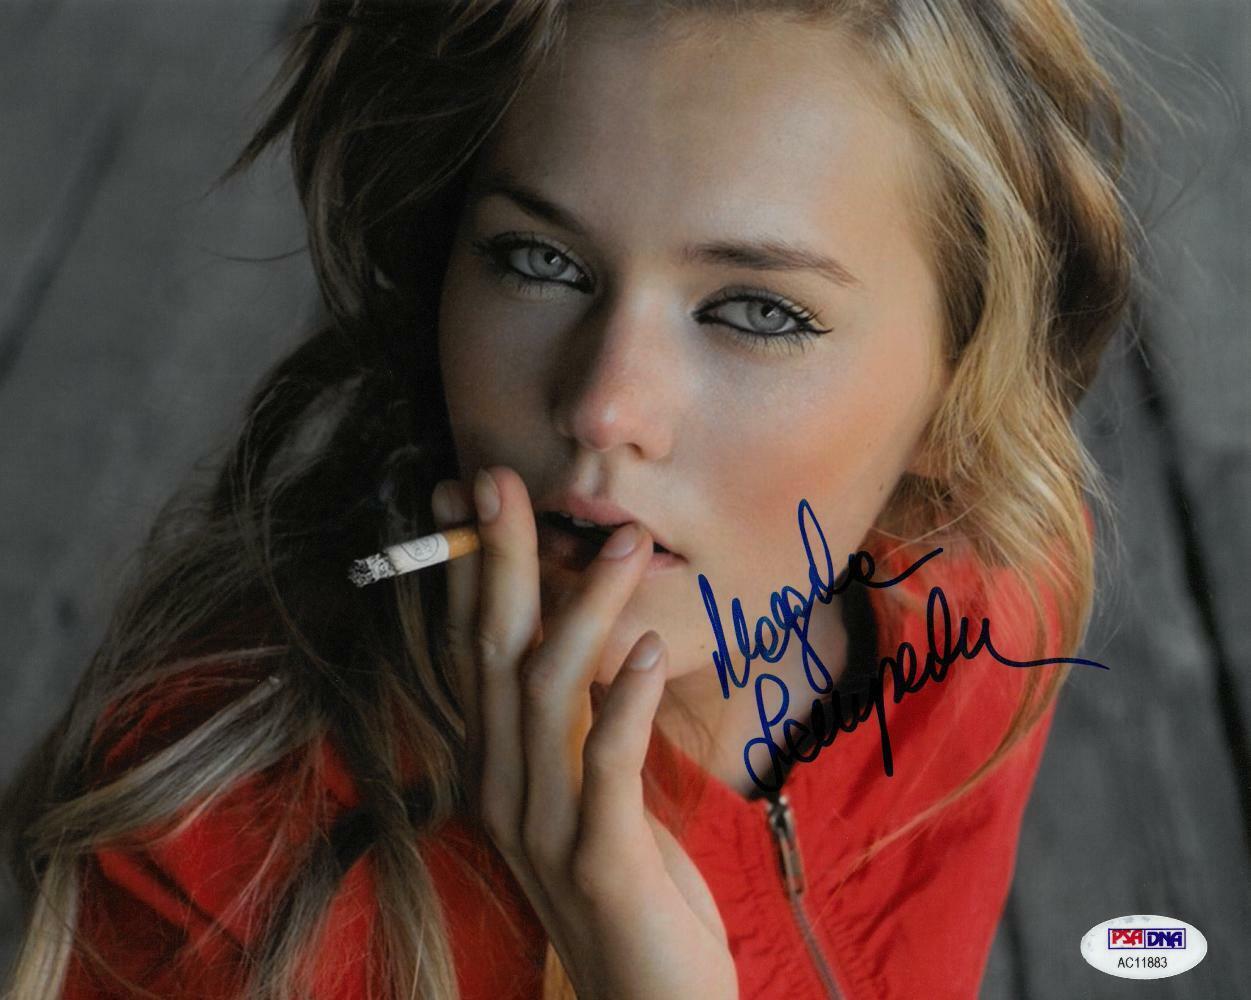 Magdalena Lamparska Signed Authentic Autographed 8x10 Photo Poster painting PSA/DNA #AC11883